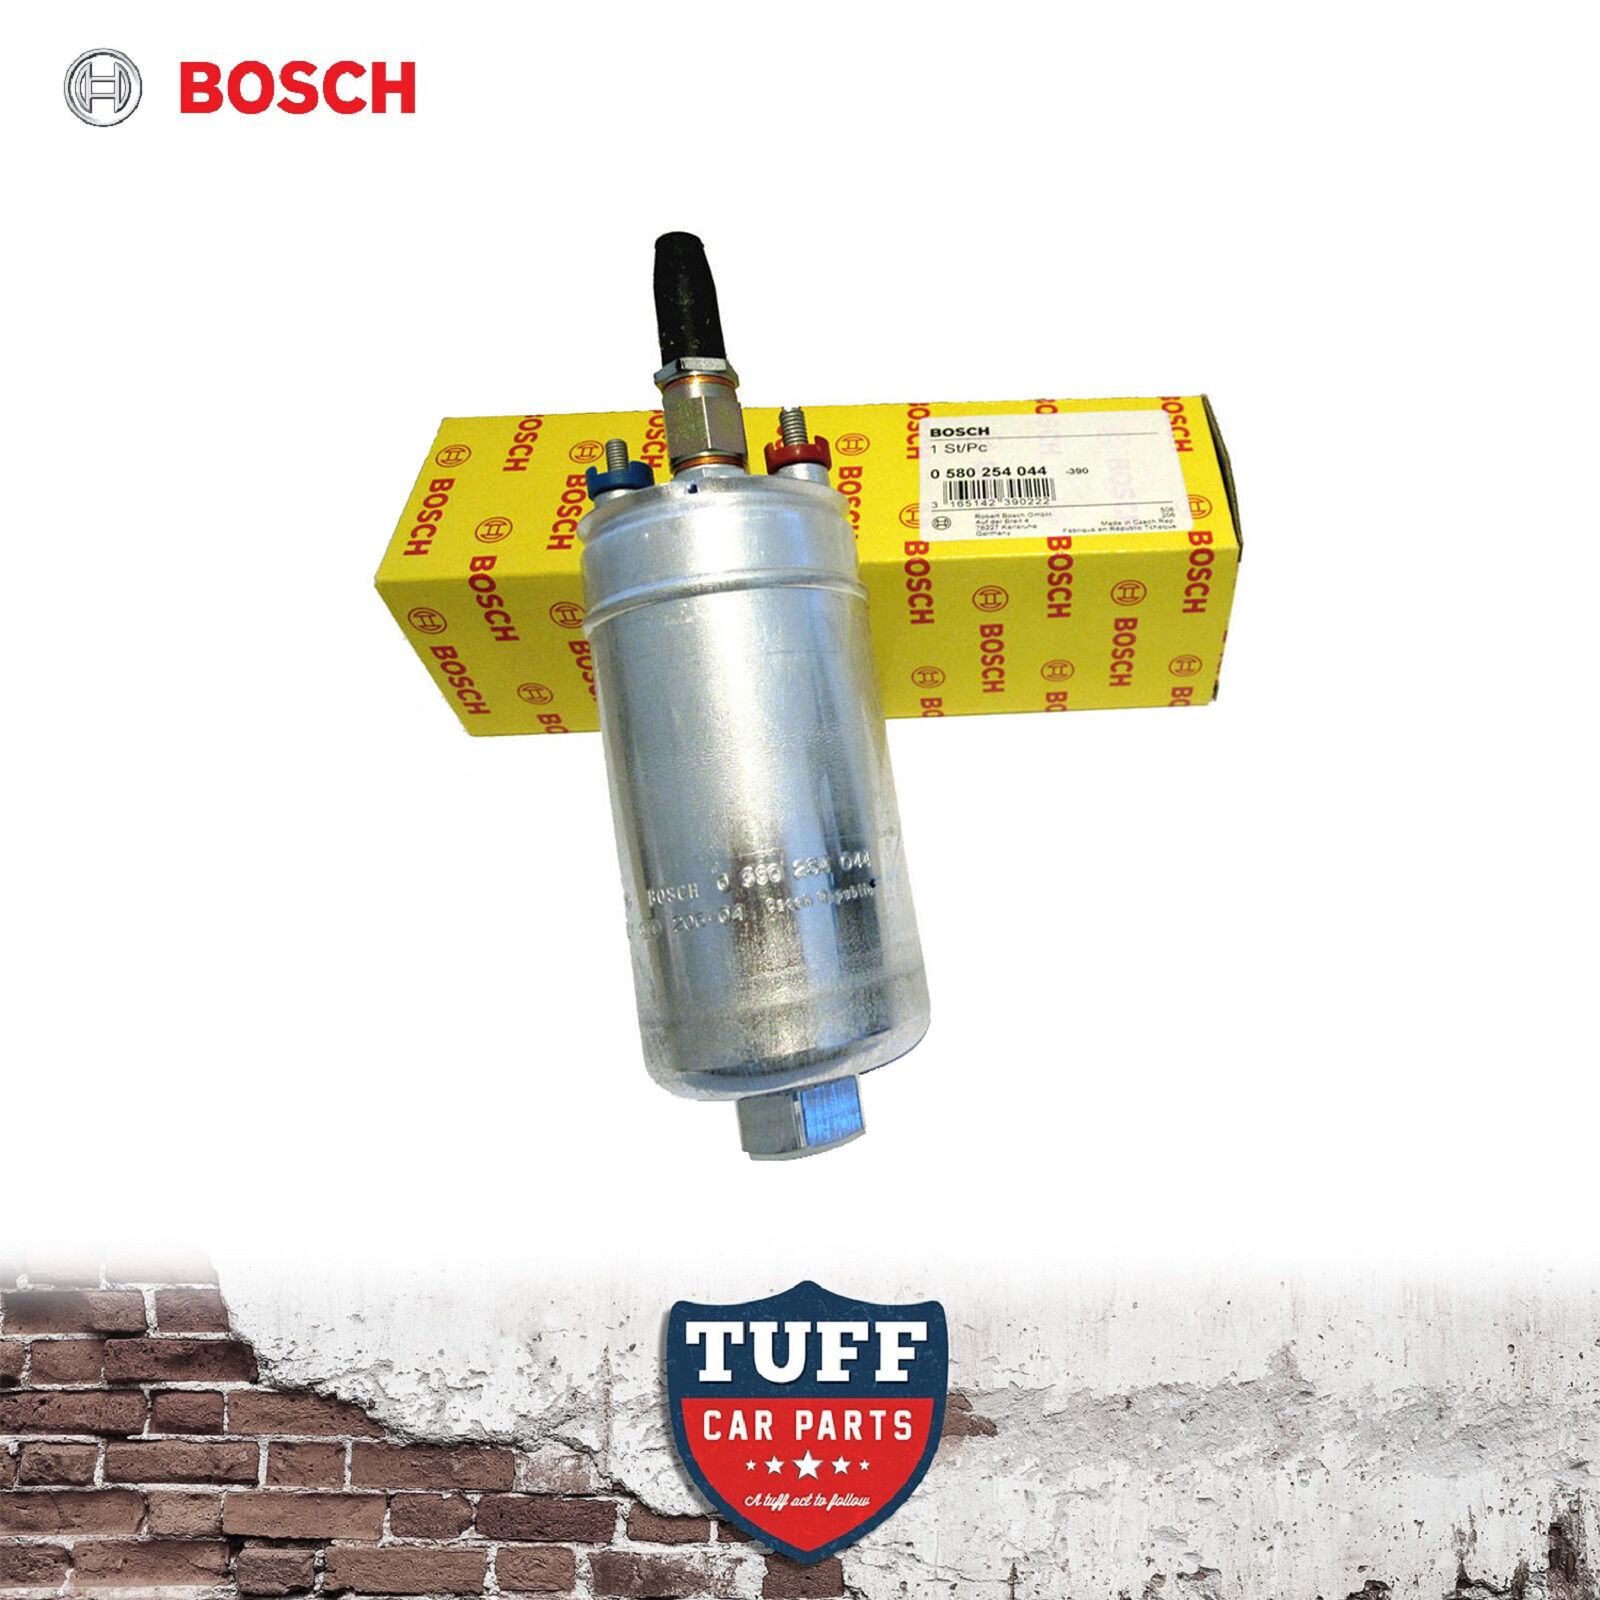 255LPH High Performance Fuel Pump Bosch 0580254044 for Benz and